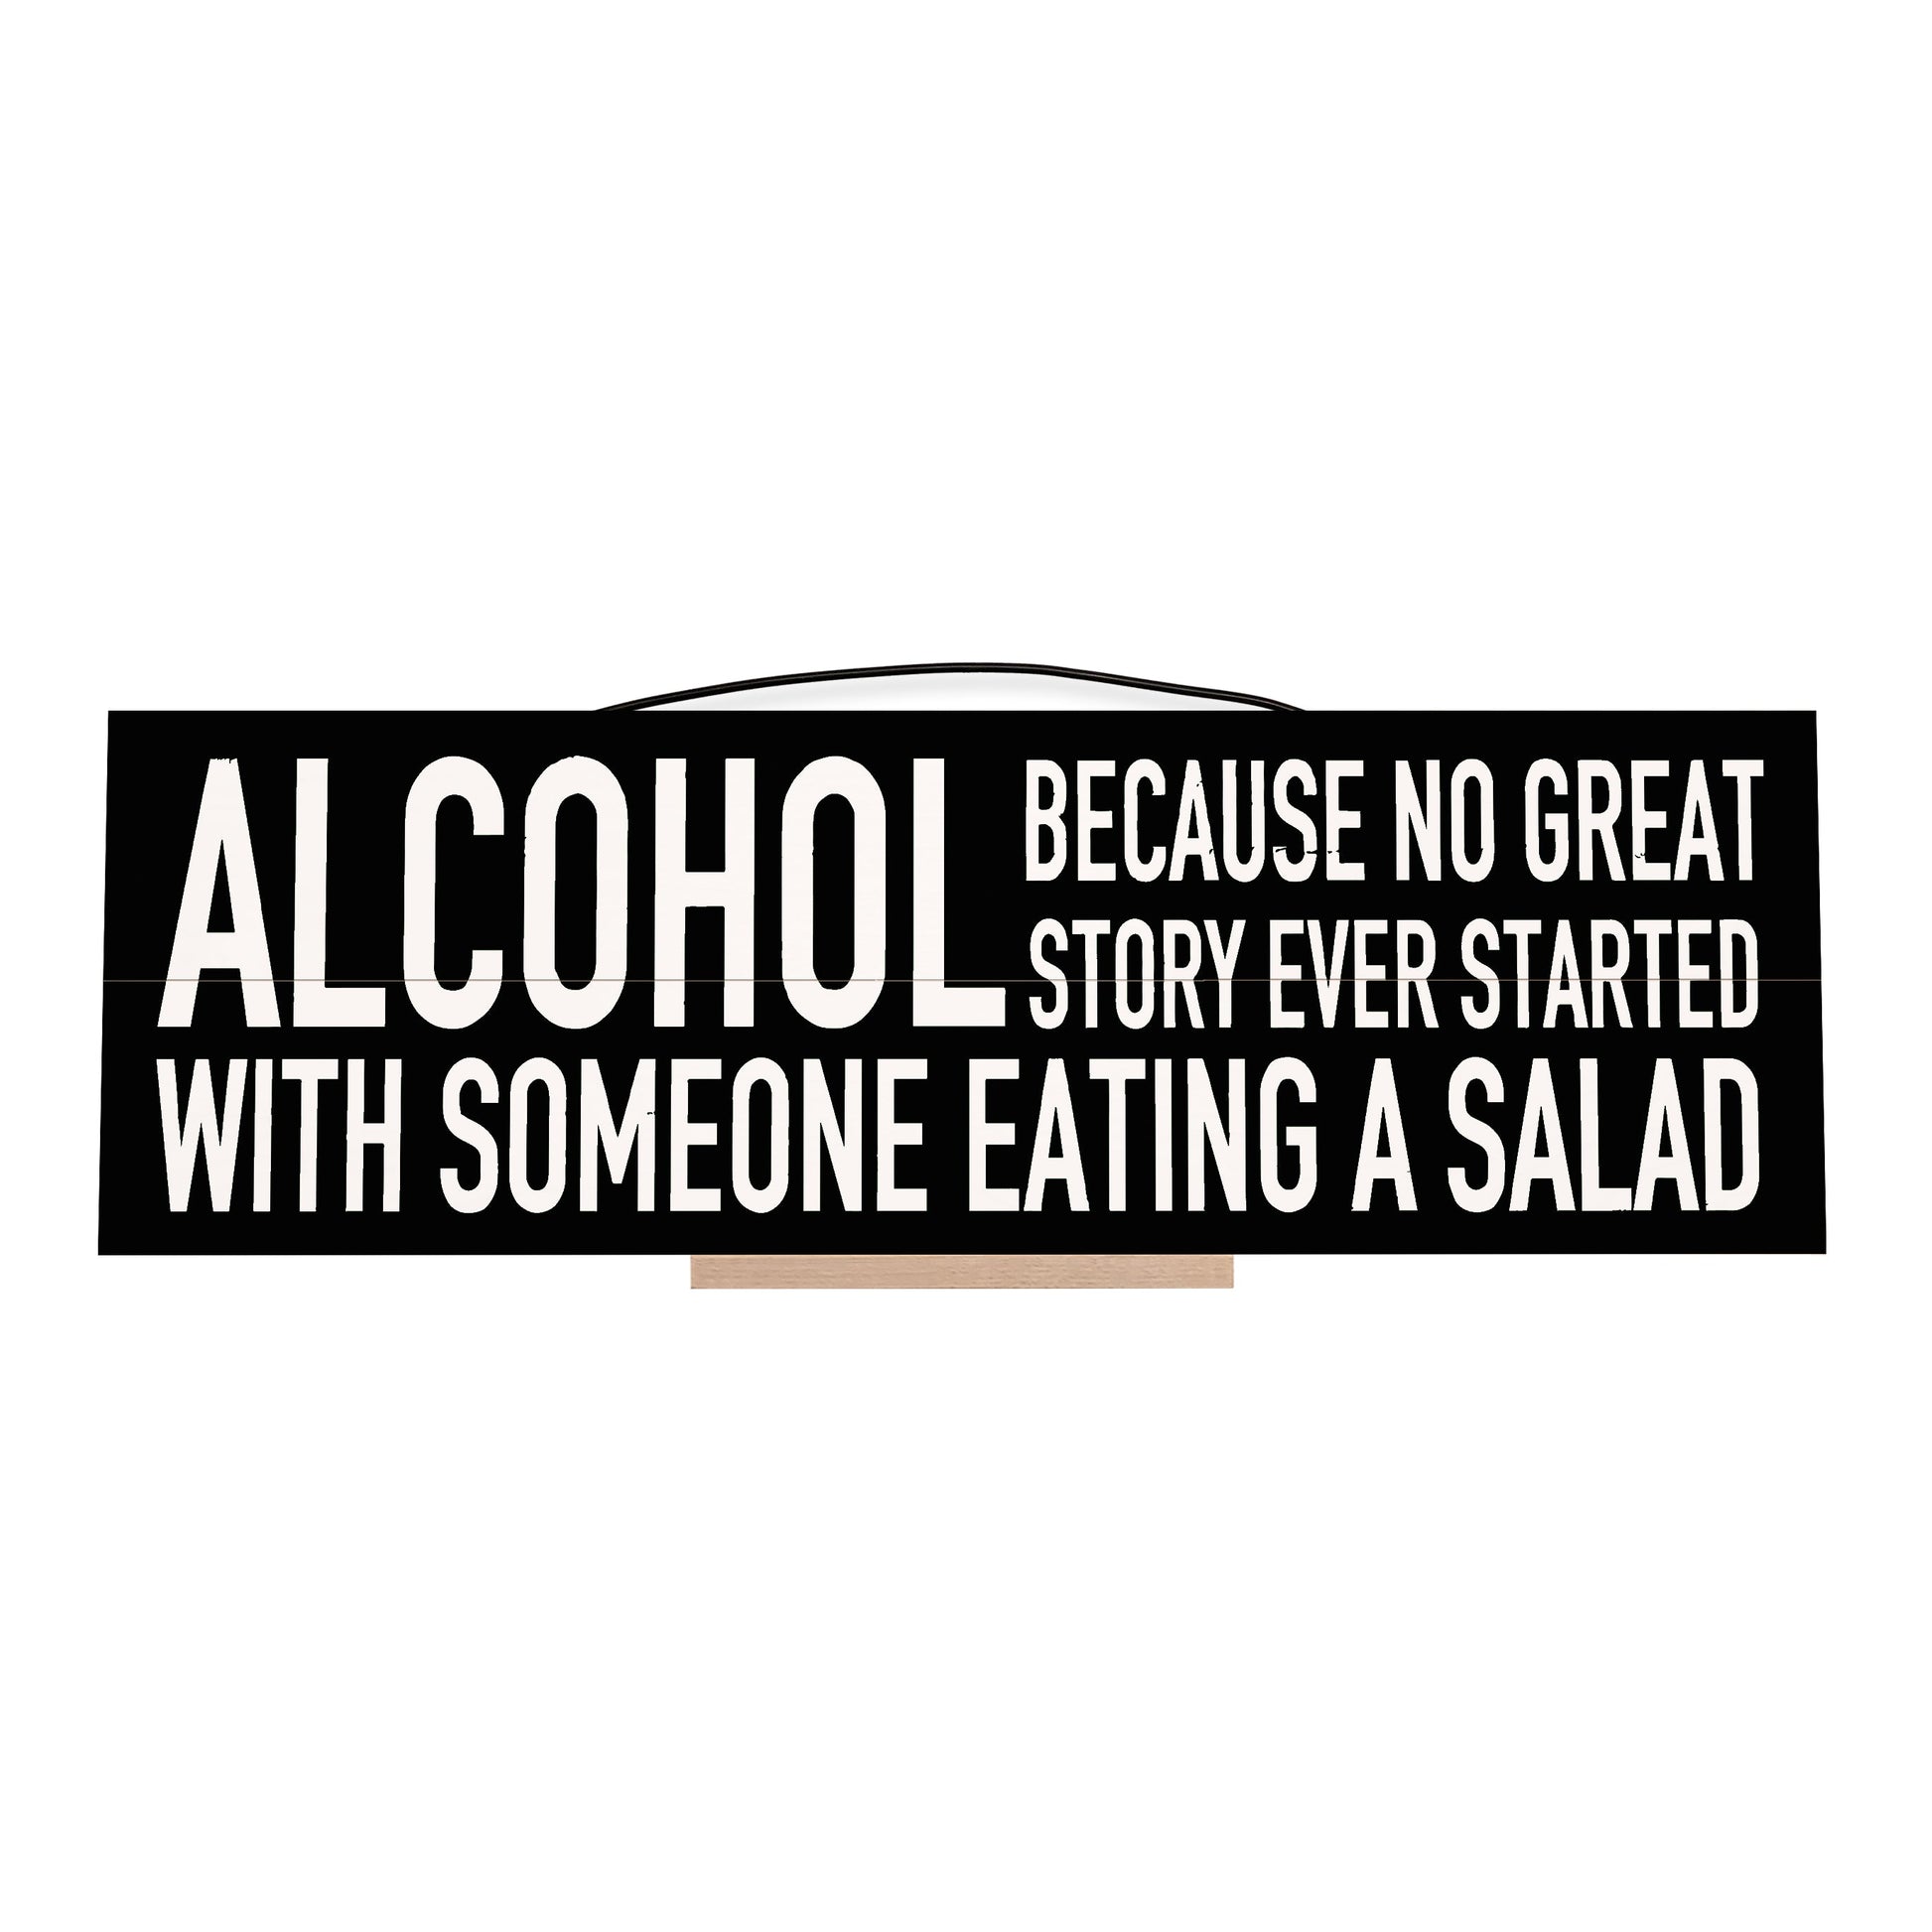 No Great Story Ever Started with Eating a Salad.